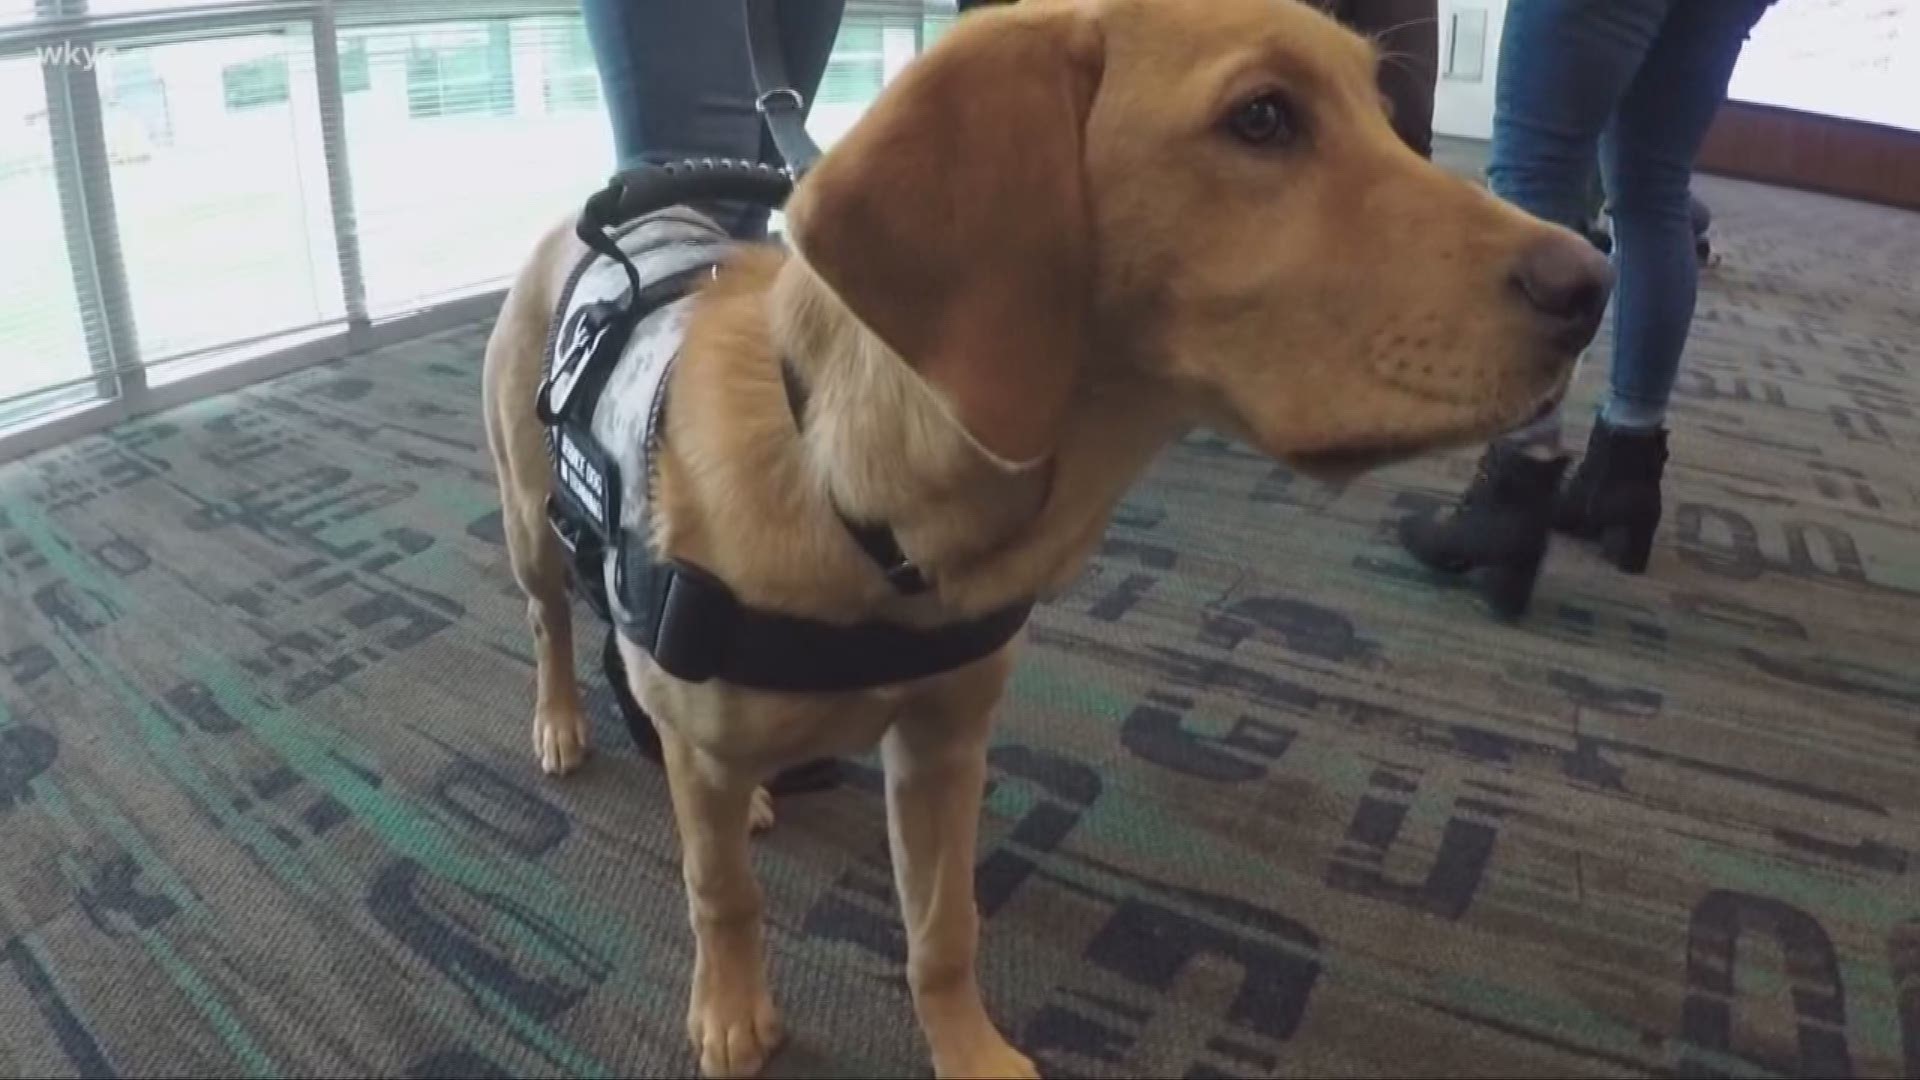 May 23, 2019: Roxy is learning so much! Our Wags 4 Warriors service dog in training shows off her latest progress.